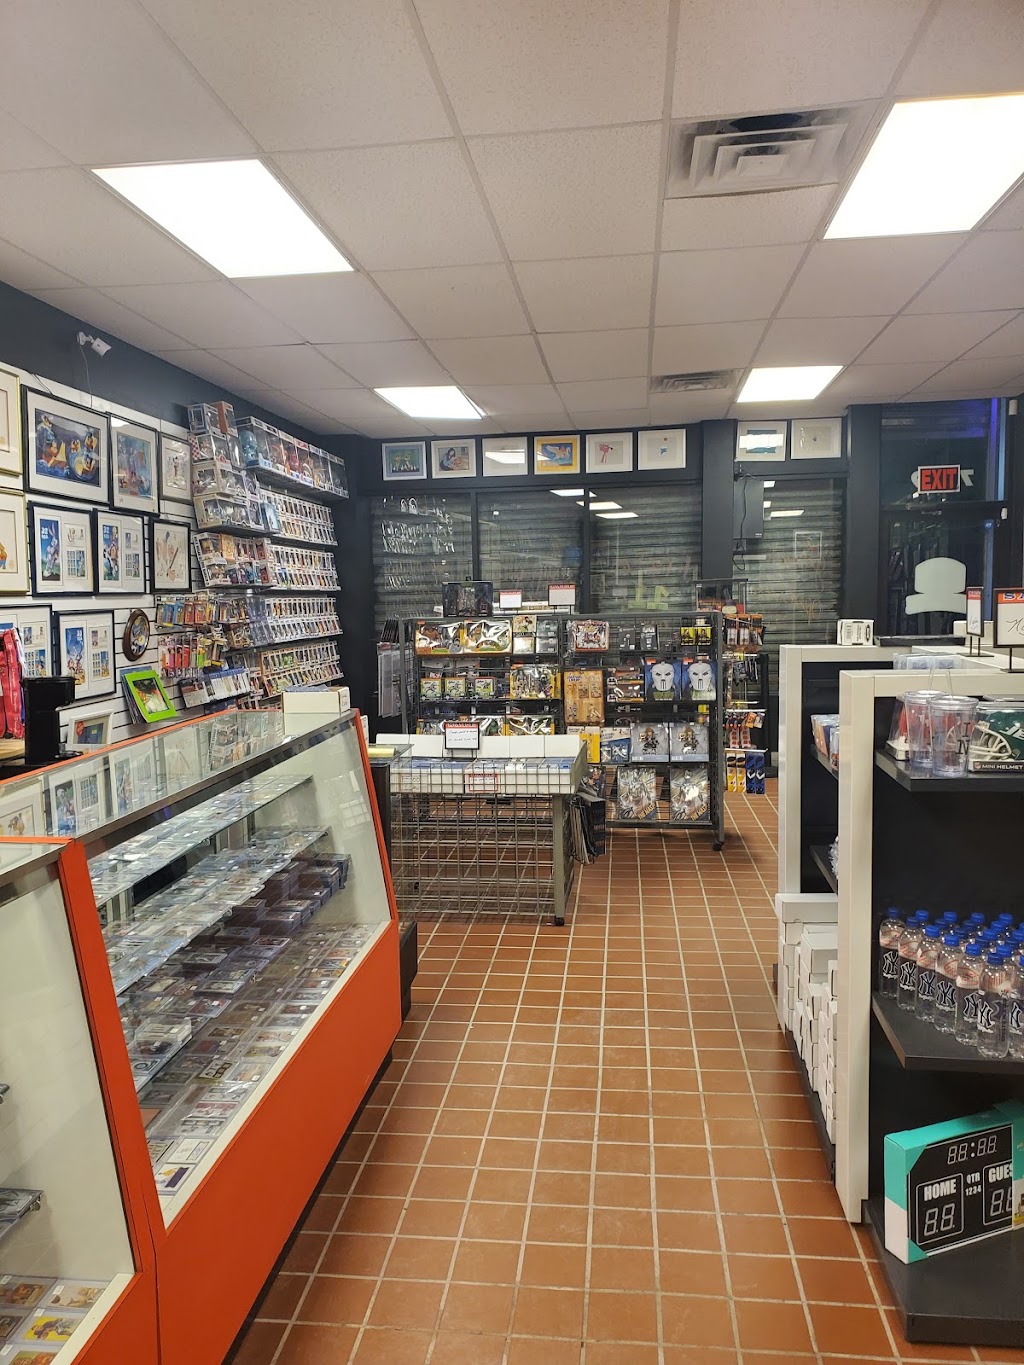 Jam Sports Cards & Collectibles | 7309 Amboy Rd, Staten Island, NY 10307 | Phone: (347) 838-6800